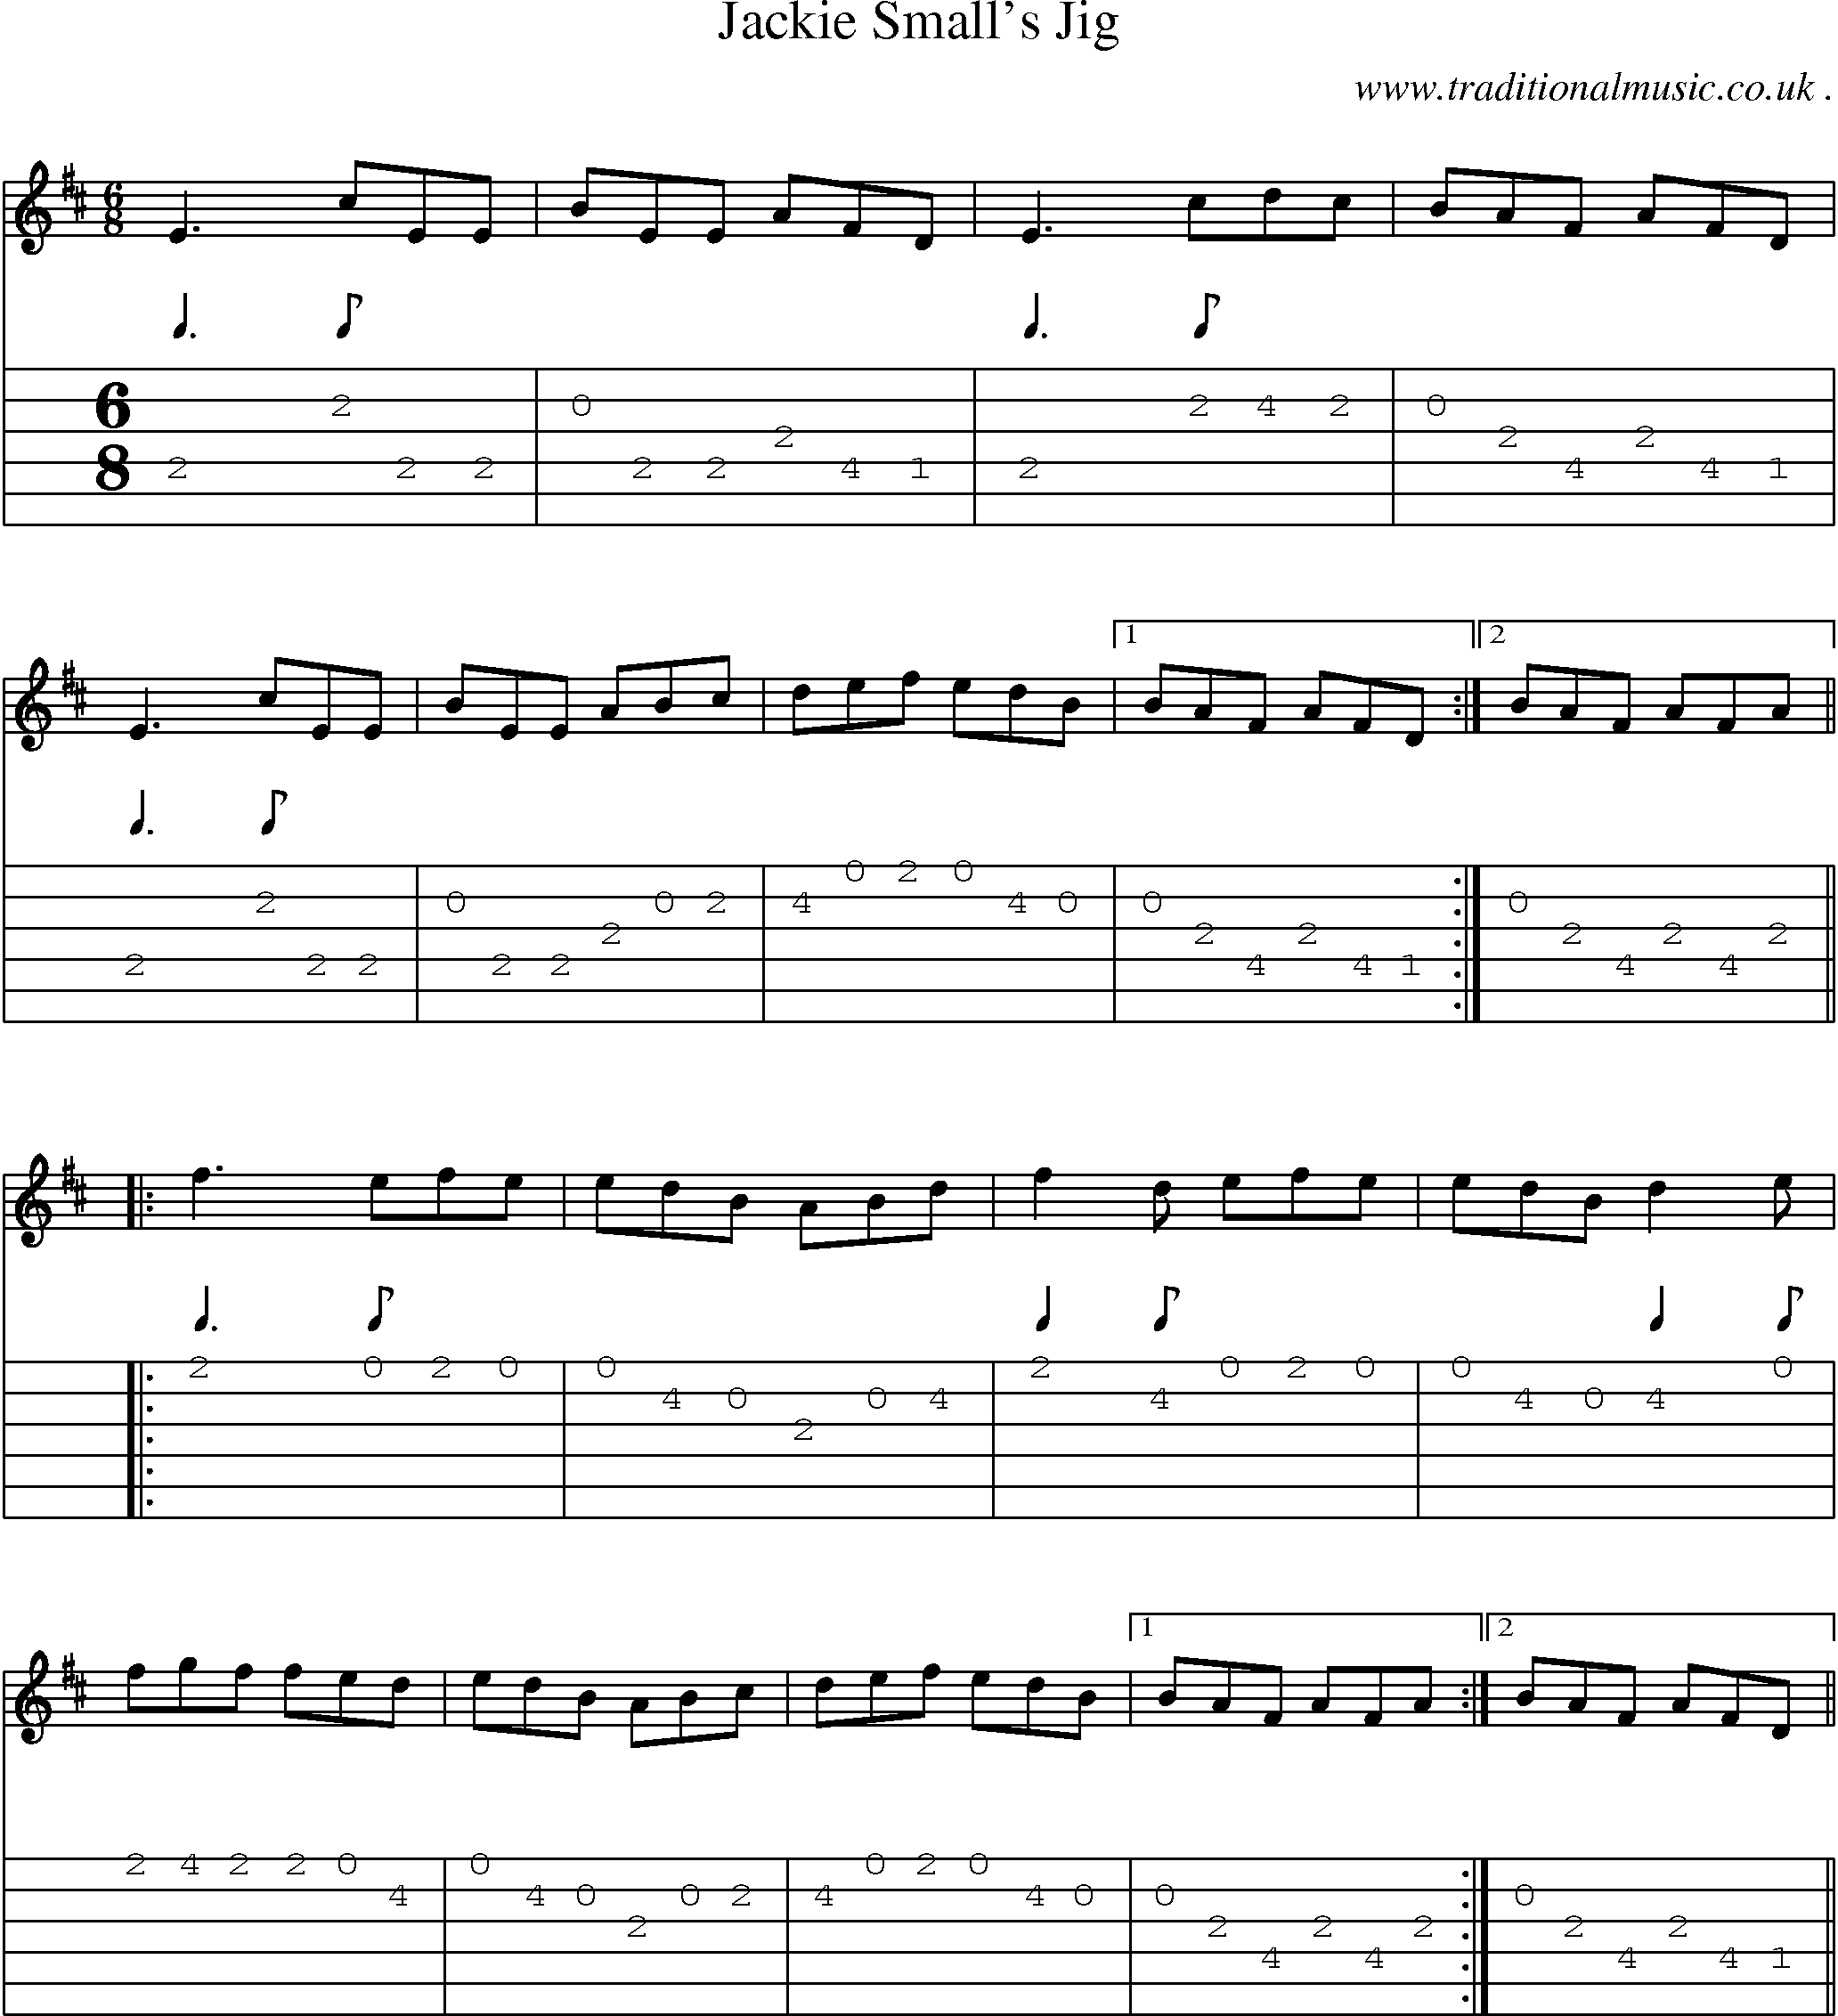 Sheet-Music and Guitar Tabs for Jackie Smalls Jig